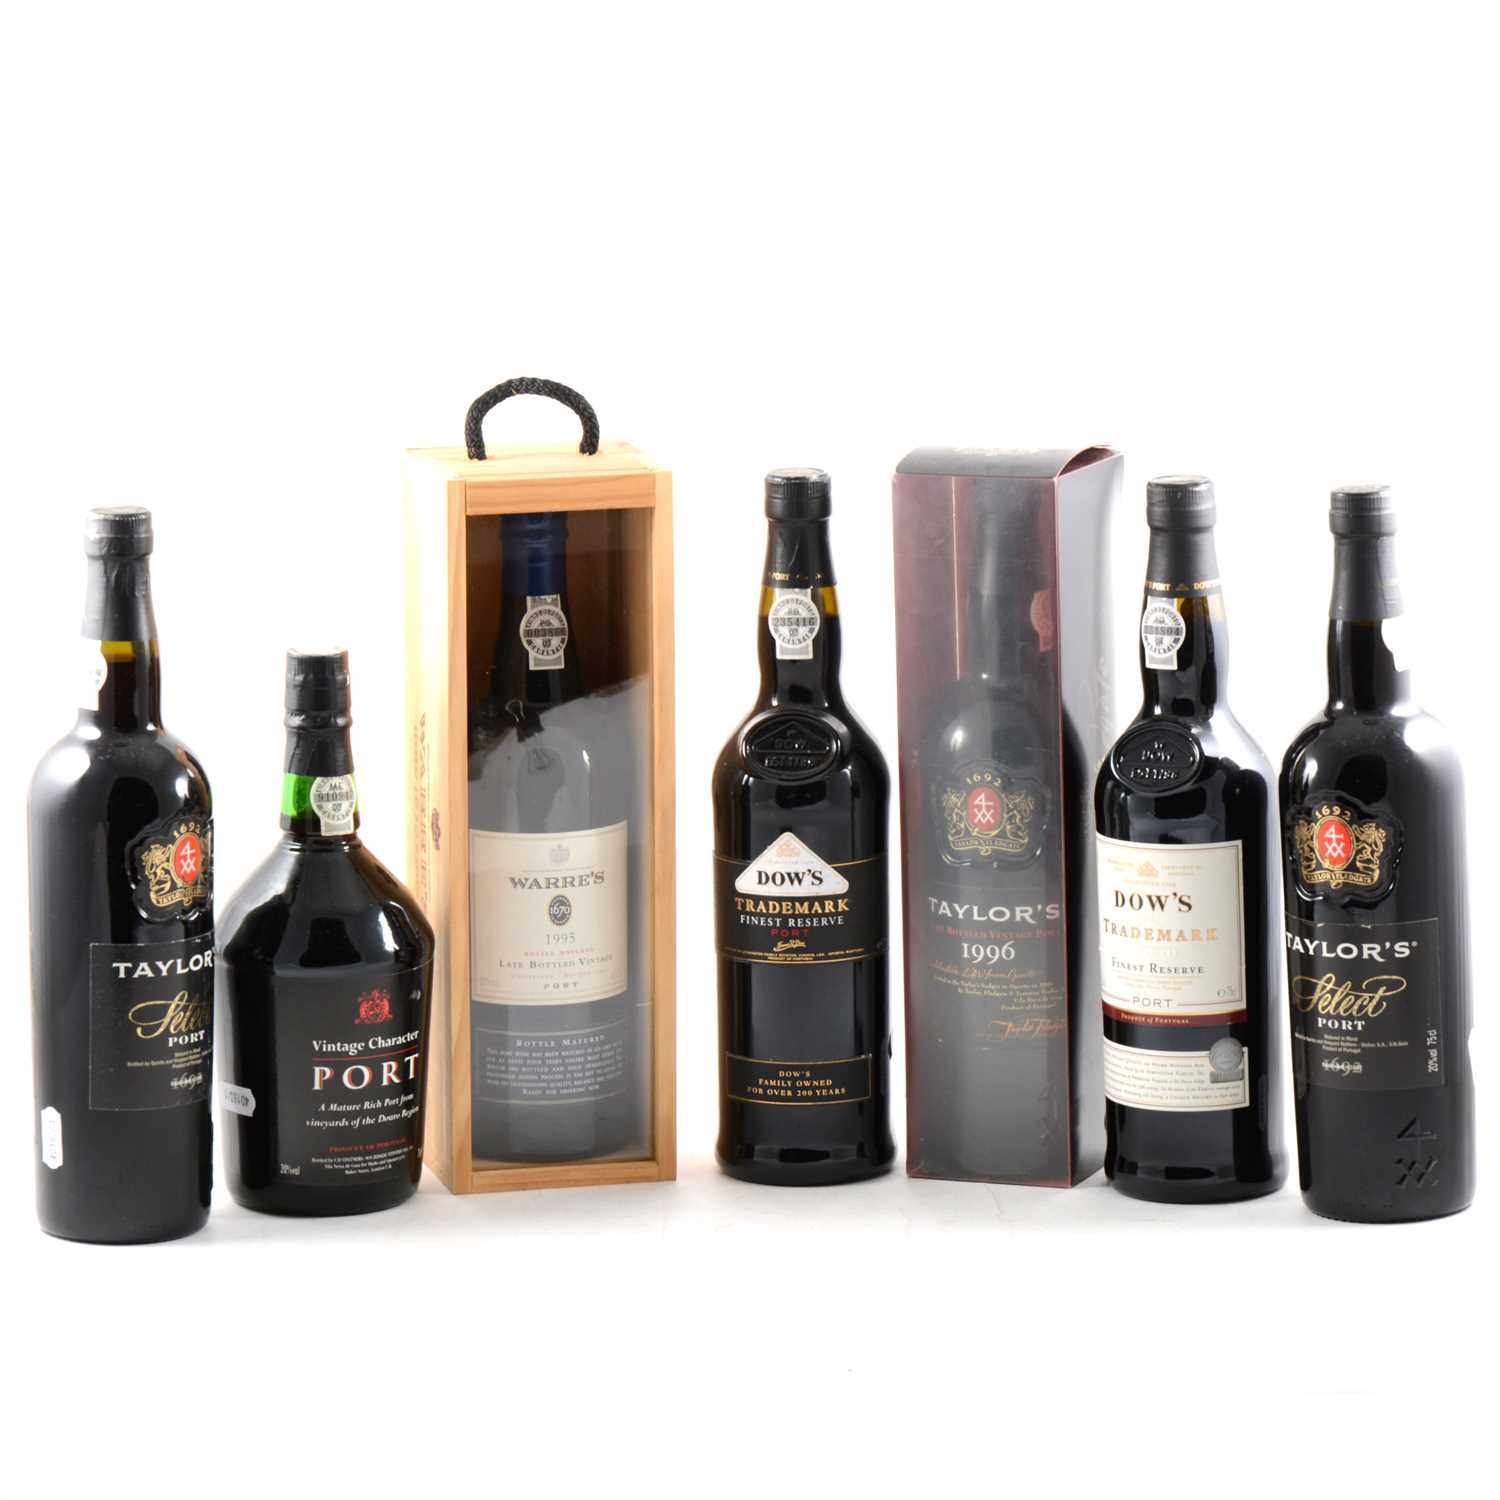 Lot 88 - Port; seven bottles including Warres, Taylor's and Dow's